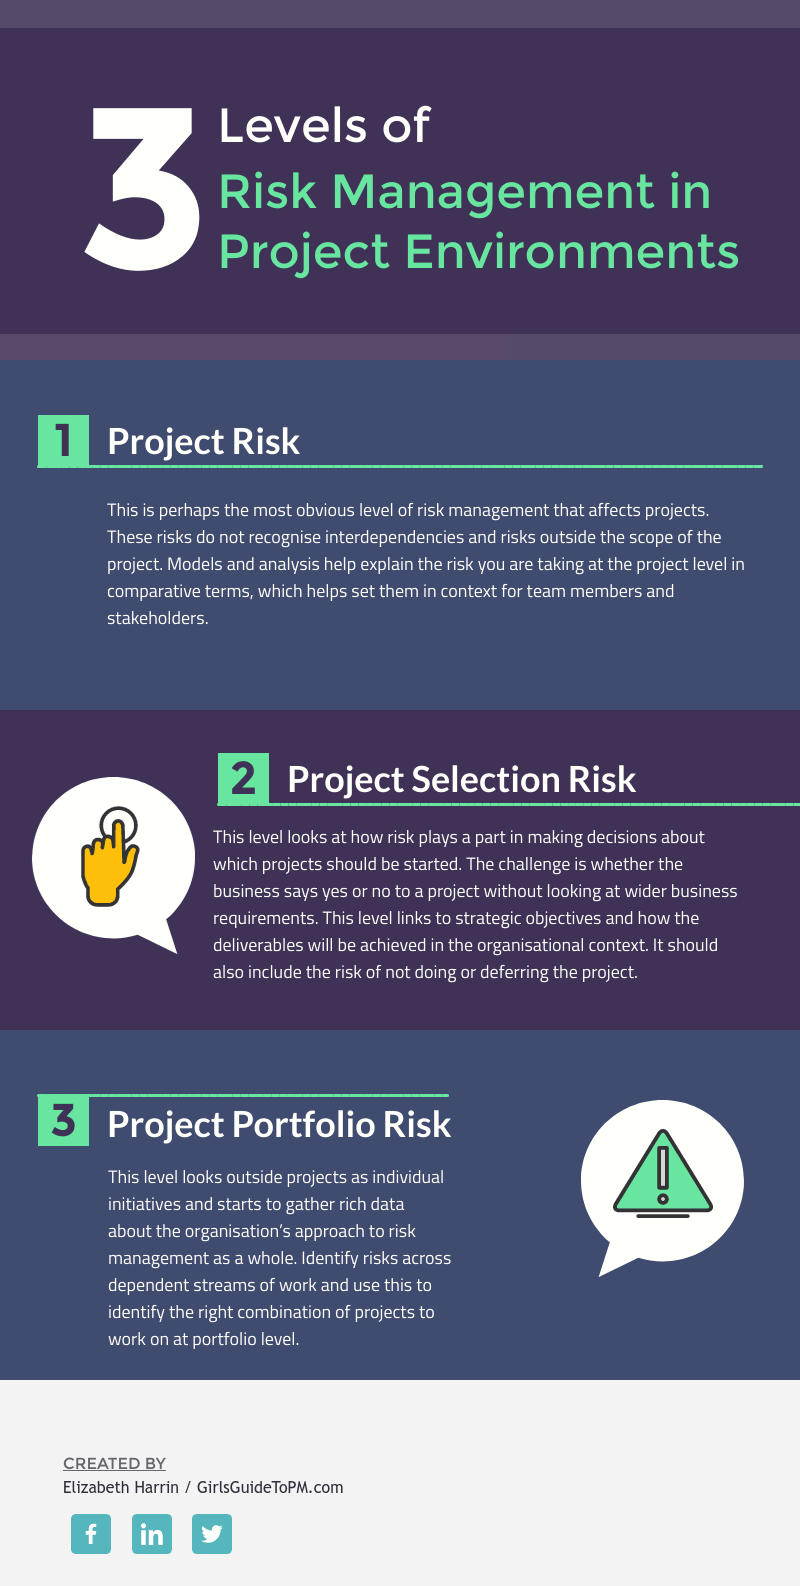 3 levels of project risk management